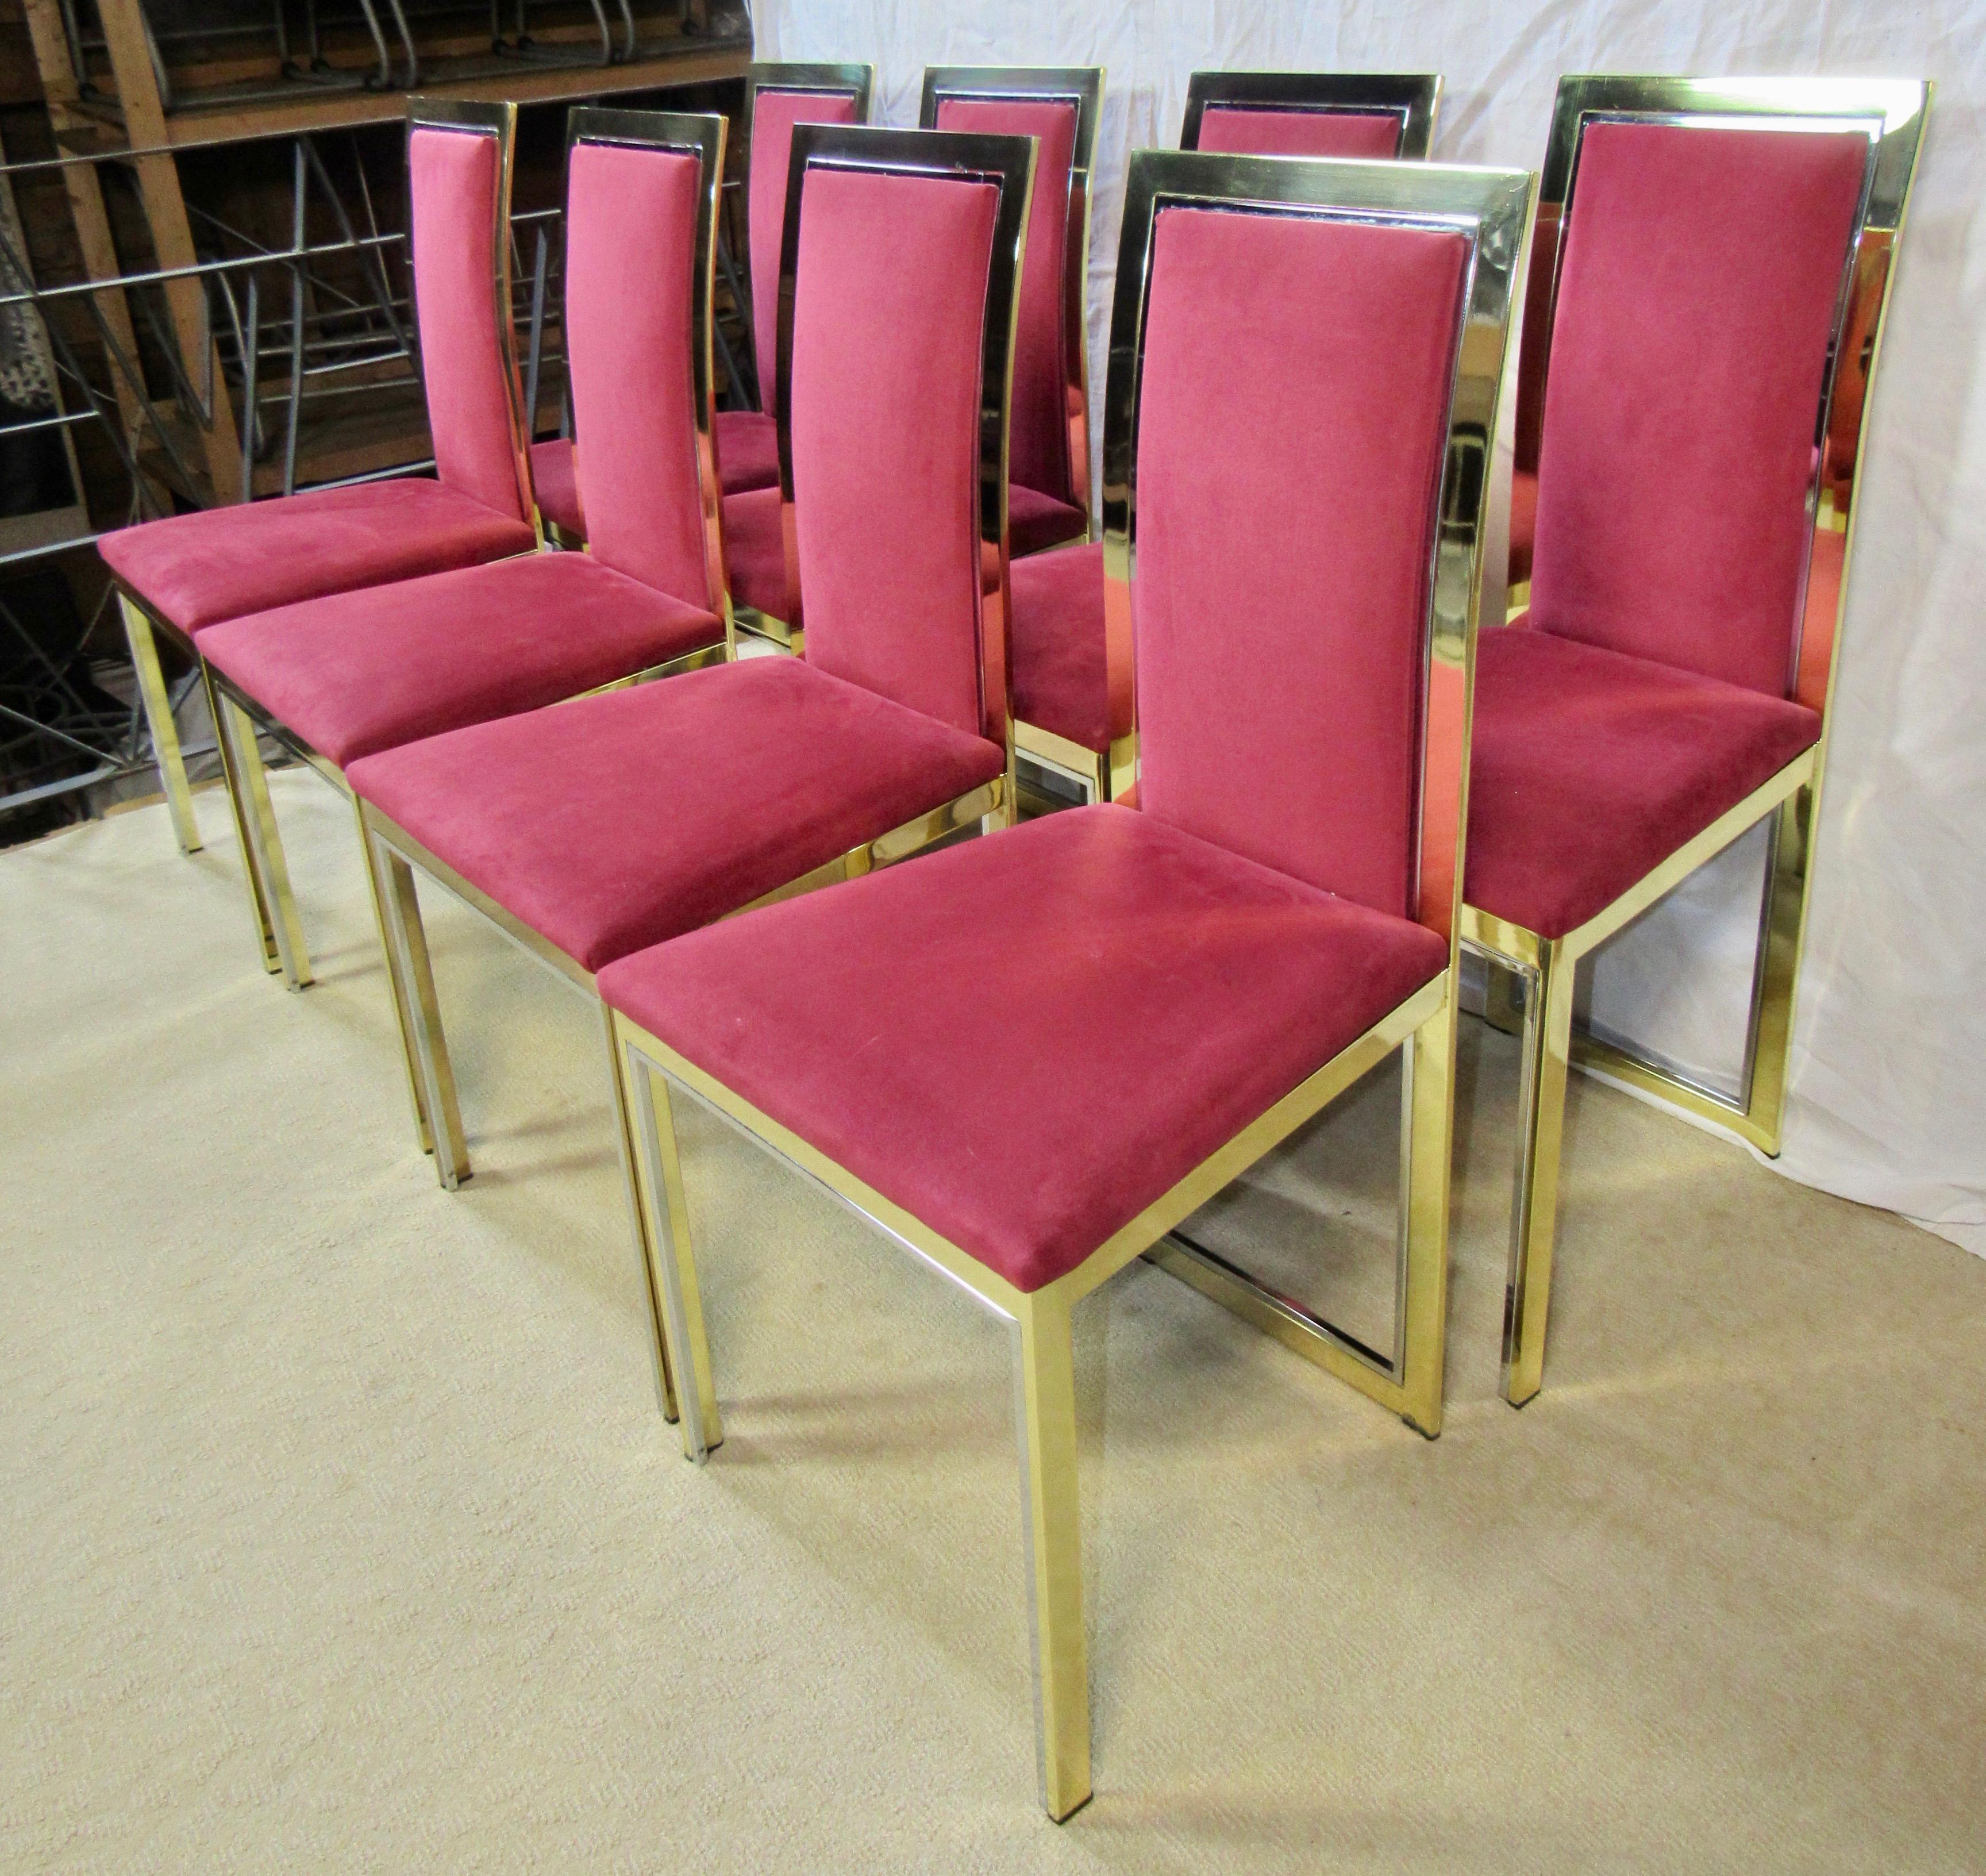 Eight polished brass framed dining chairs attributed to Romeo Rega with inset polished aluminum tube details. 
The mixed metal framing adds a dramatic note to the chairs' appearance. 
The vintage upholstery is a raspberry Alcantara, a Japanese